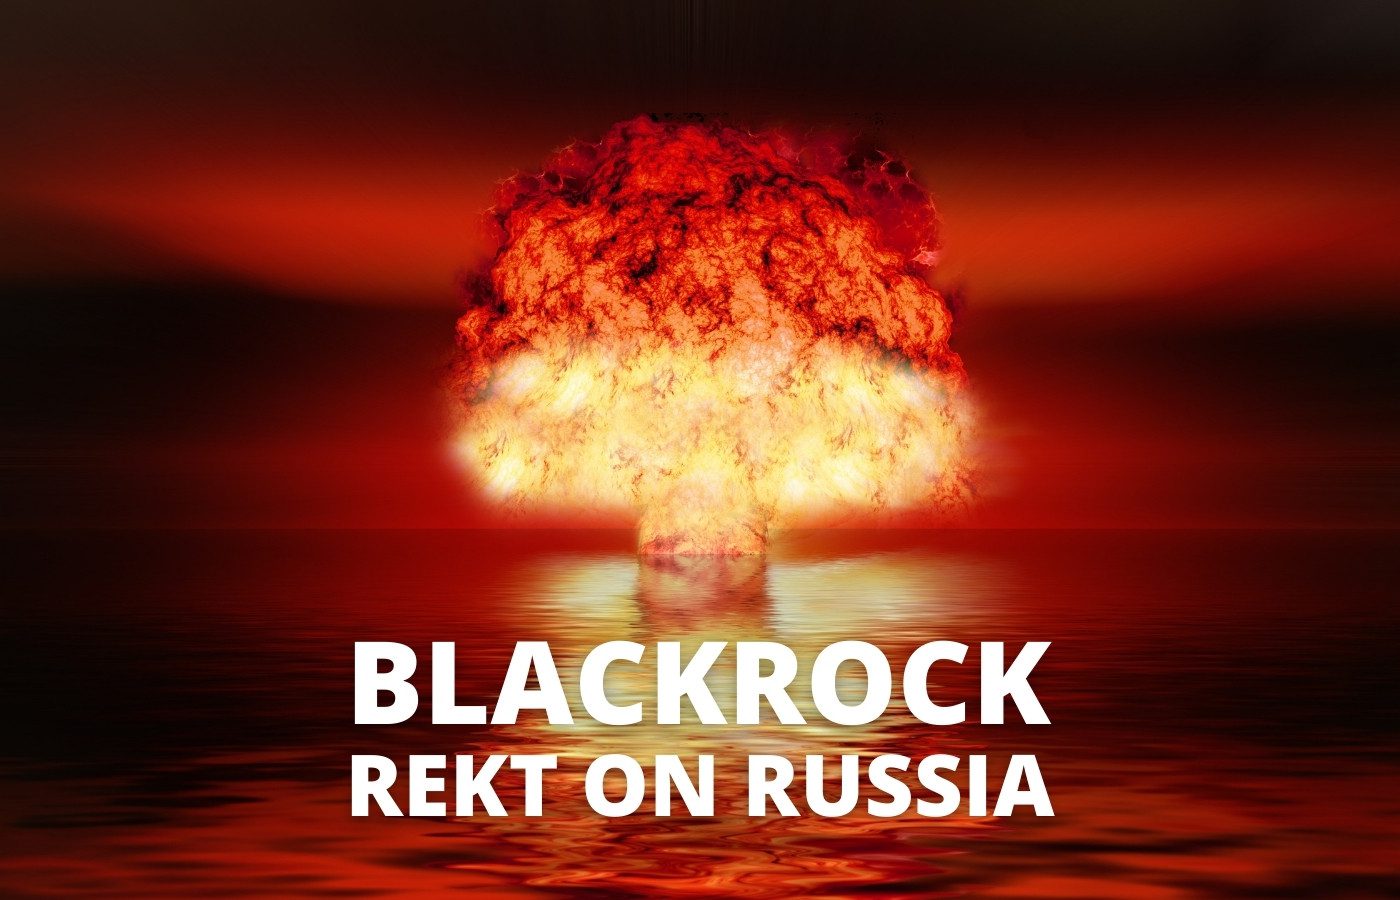 You are currently viewing Blackrock lost $17 Billion in Russia… tried to make money on war, got REKT. What a terrible shame.